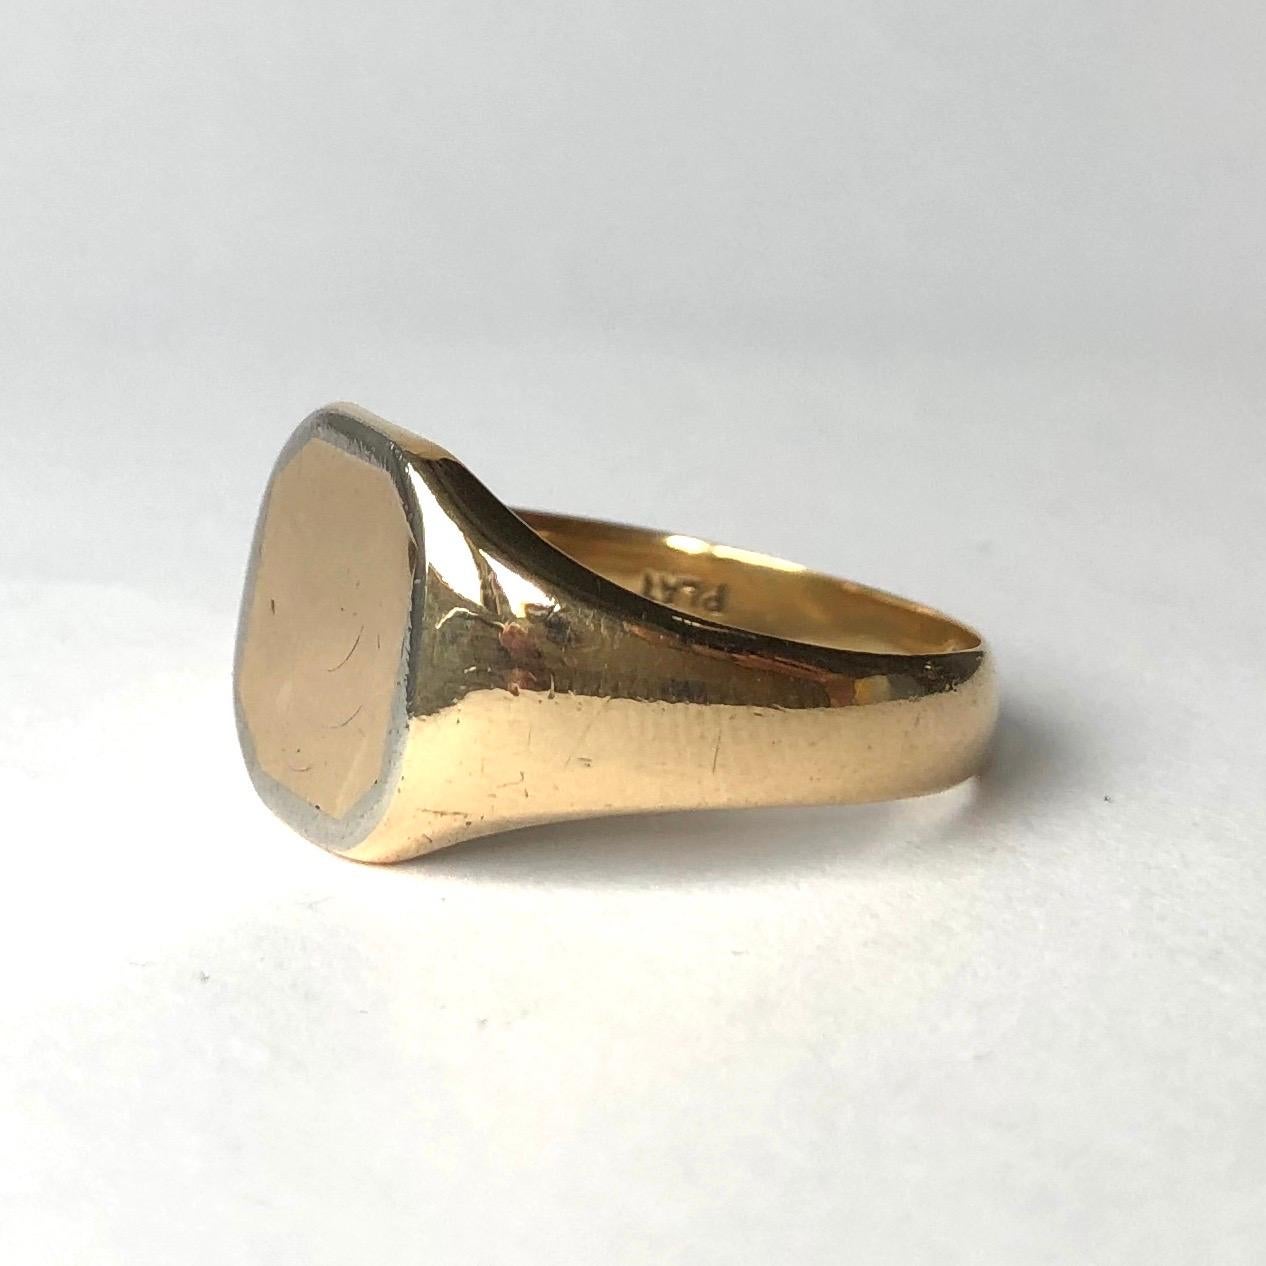 This unusual signet ring is made by Henry Griffith & Sons, made in Leamington Spa with Chester assay marks. The ring is modelled in 18ct carat gold and the face of the ring is framed with platinum. 

Face Dimensions: S or 9 

Weight: 7.86g